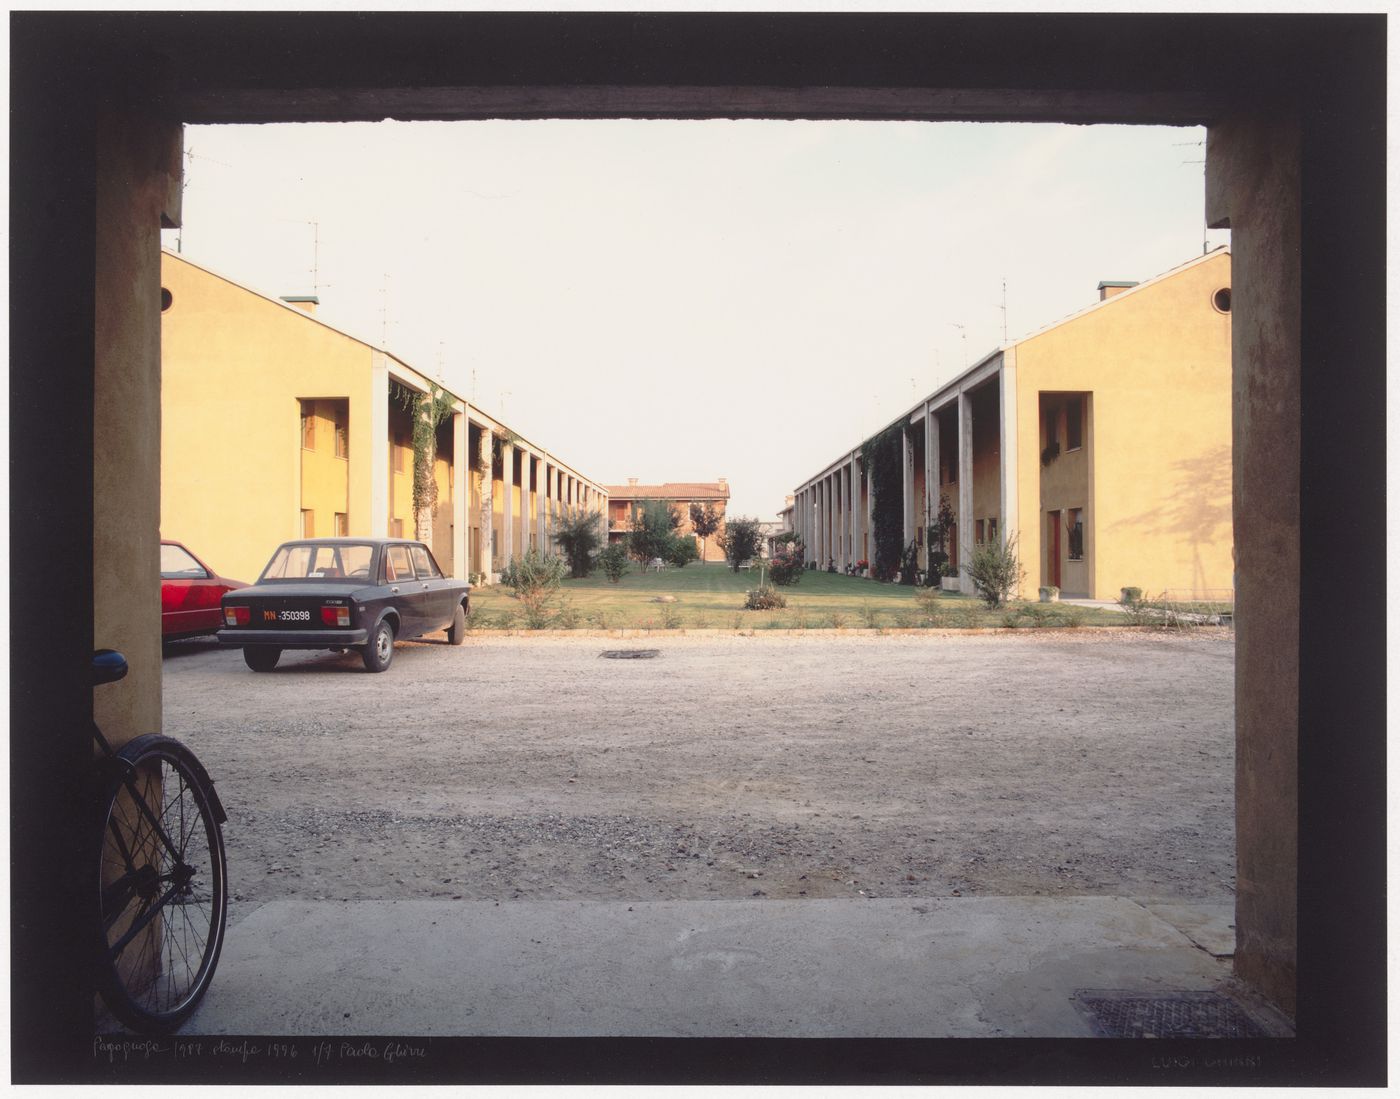 Single-family housing, Pegognaga, 1979: The porticos and the courtyard between the two blocks